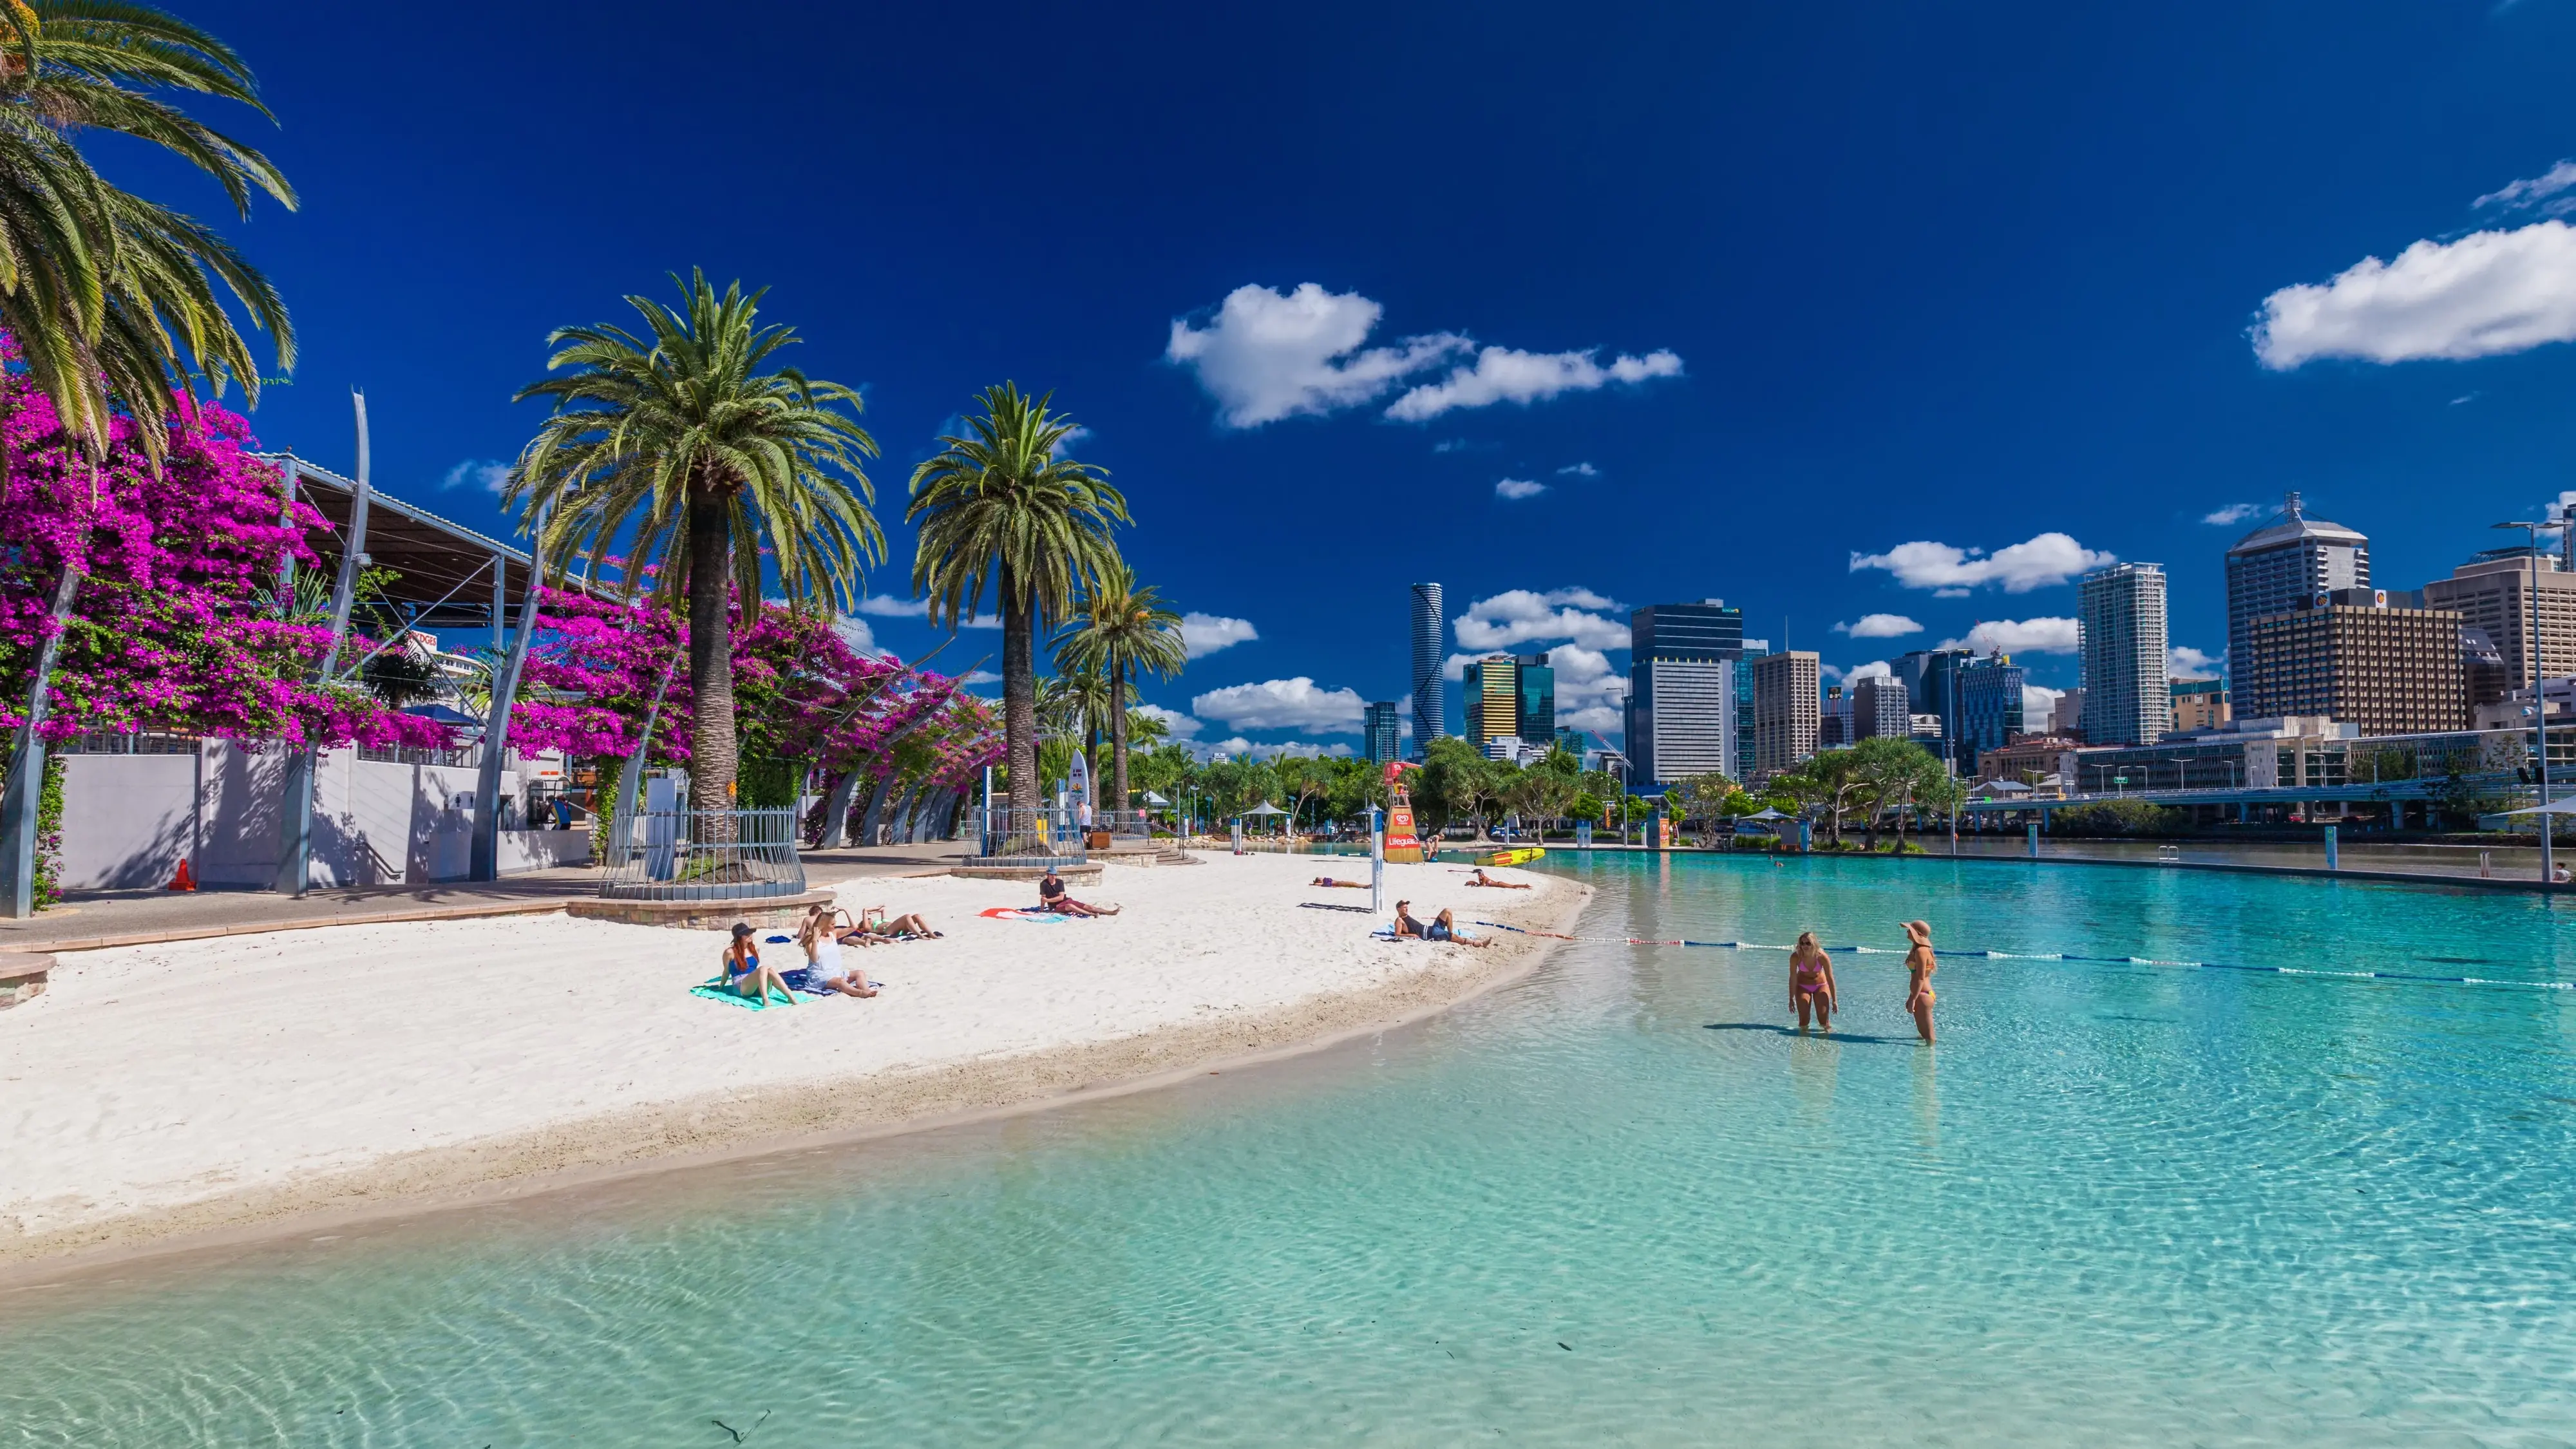 A man-made beach with sand and palm trees and the Brisbane CBD in the background. Image credit: Shutterstock